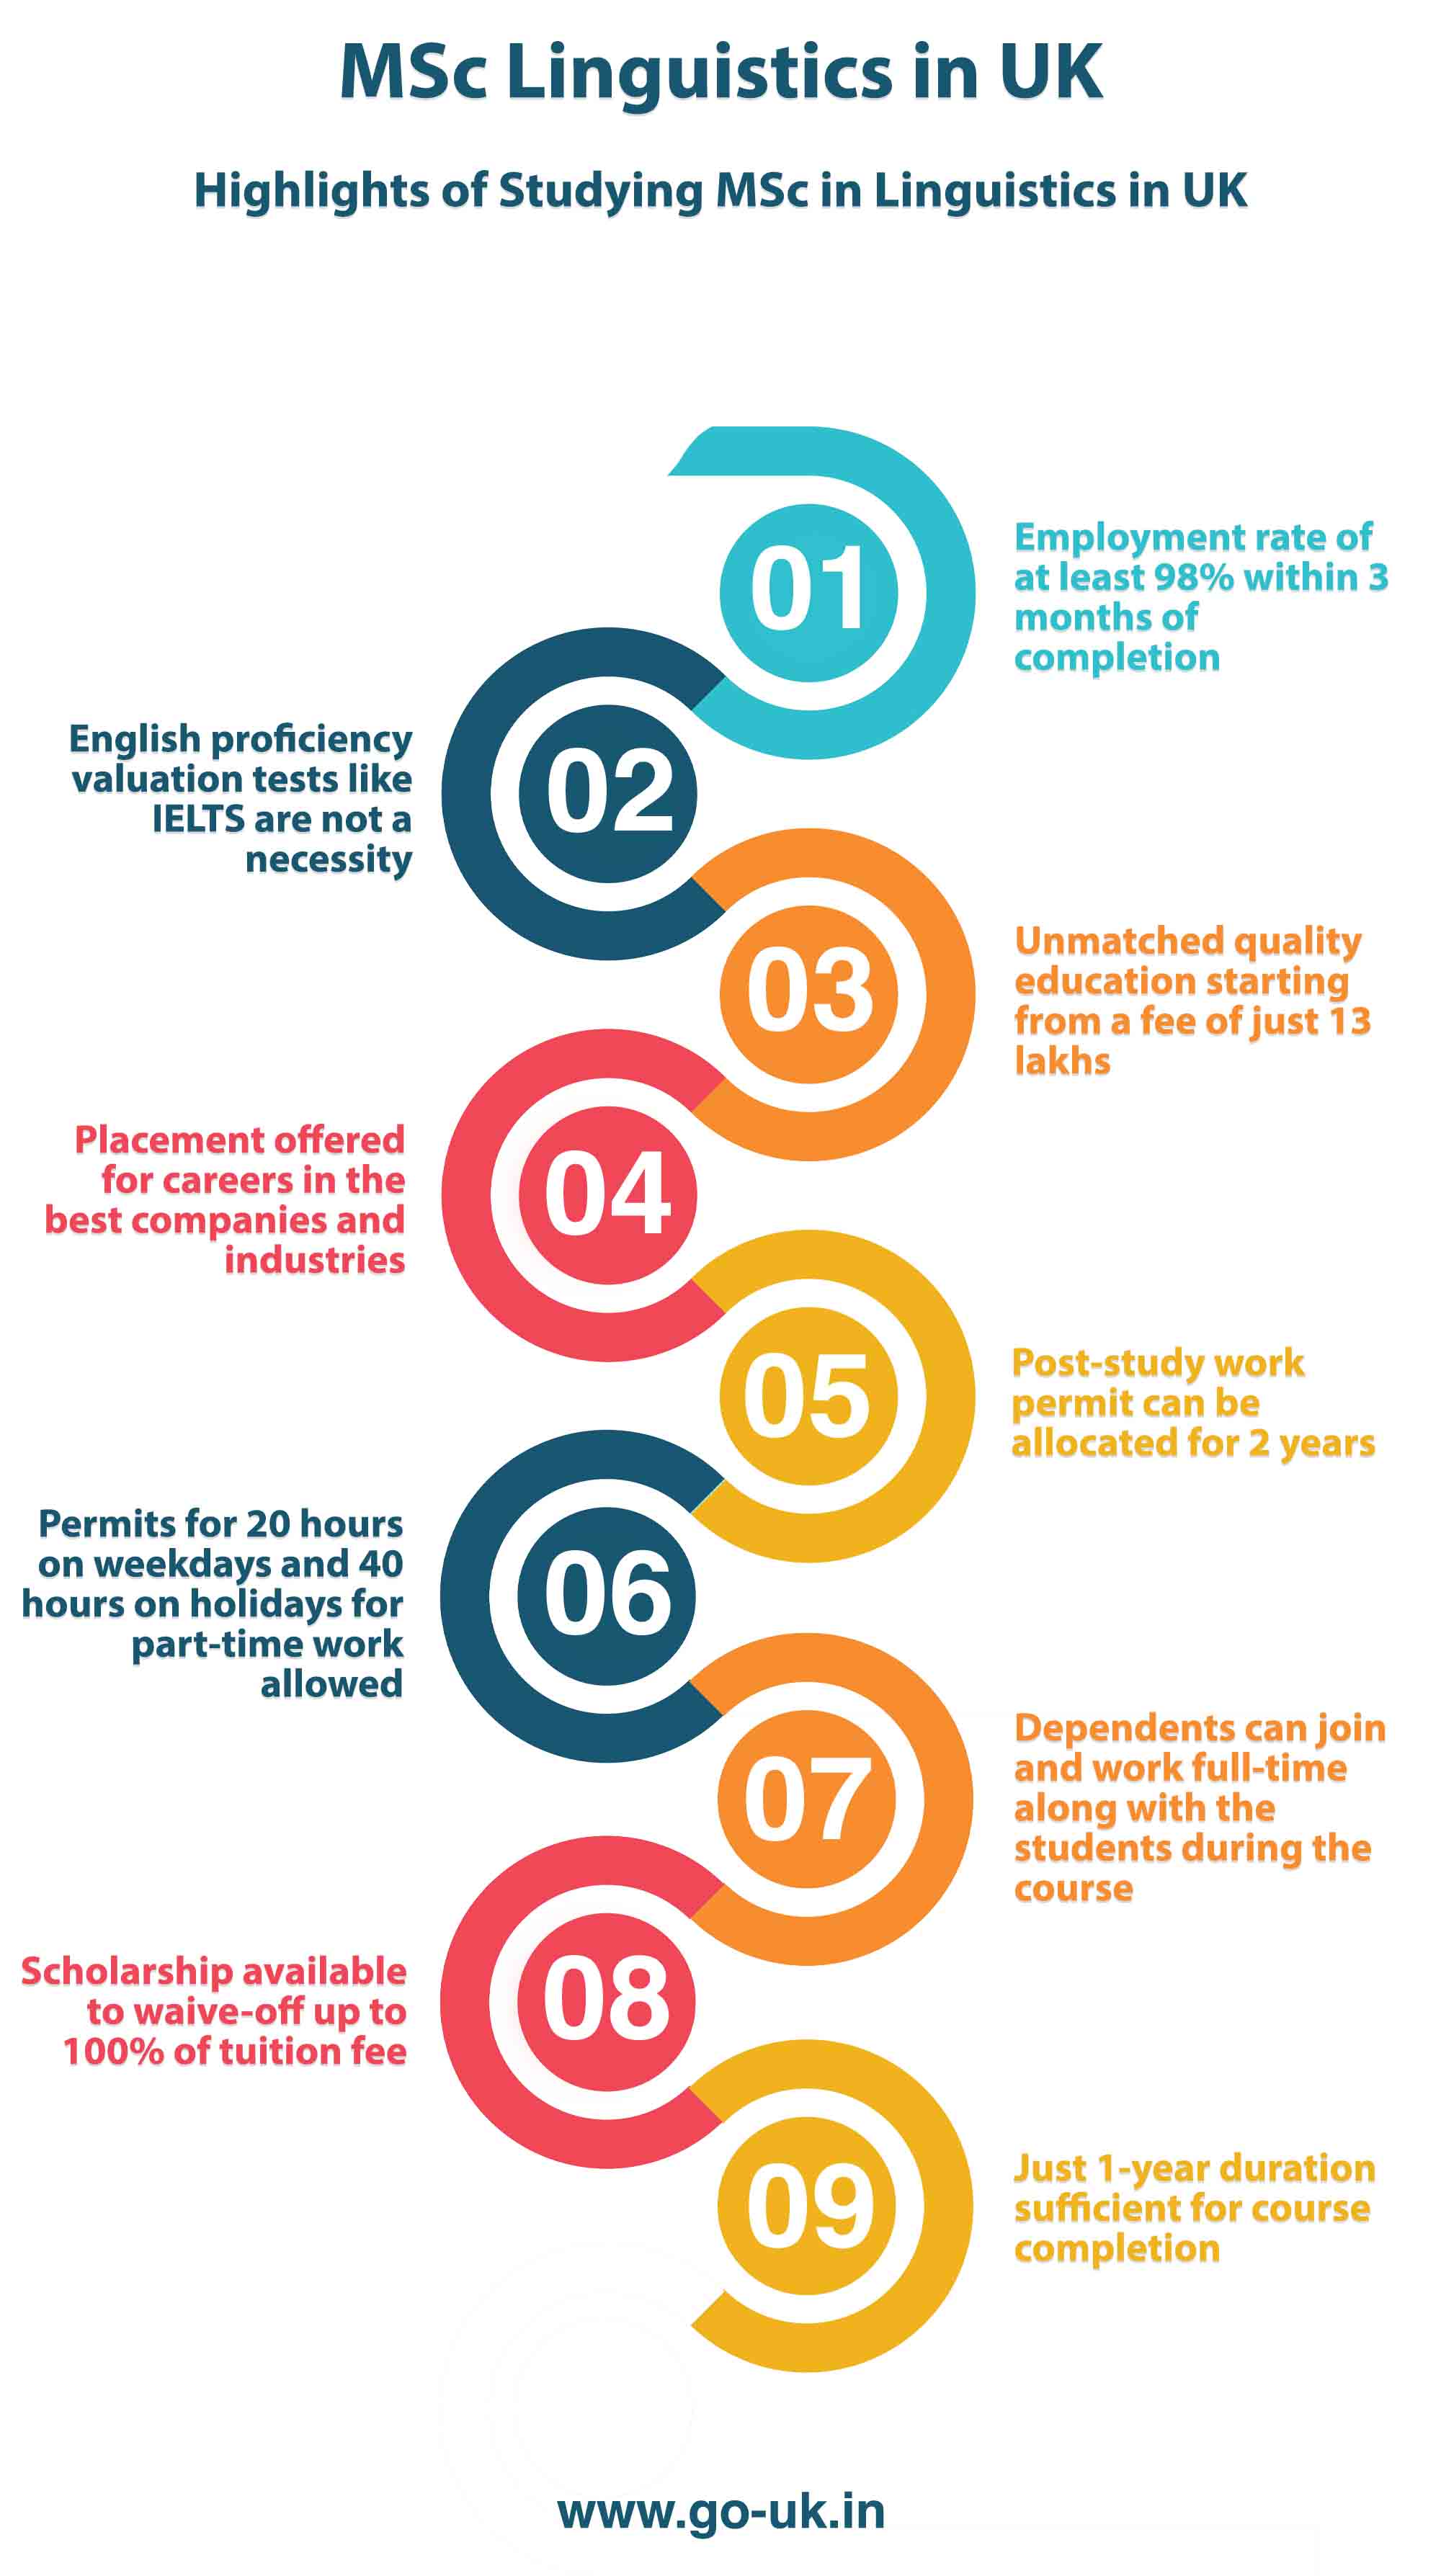 Highlights of Studying MSc in Linguistics in UK